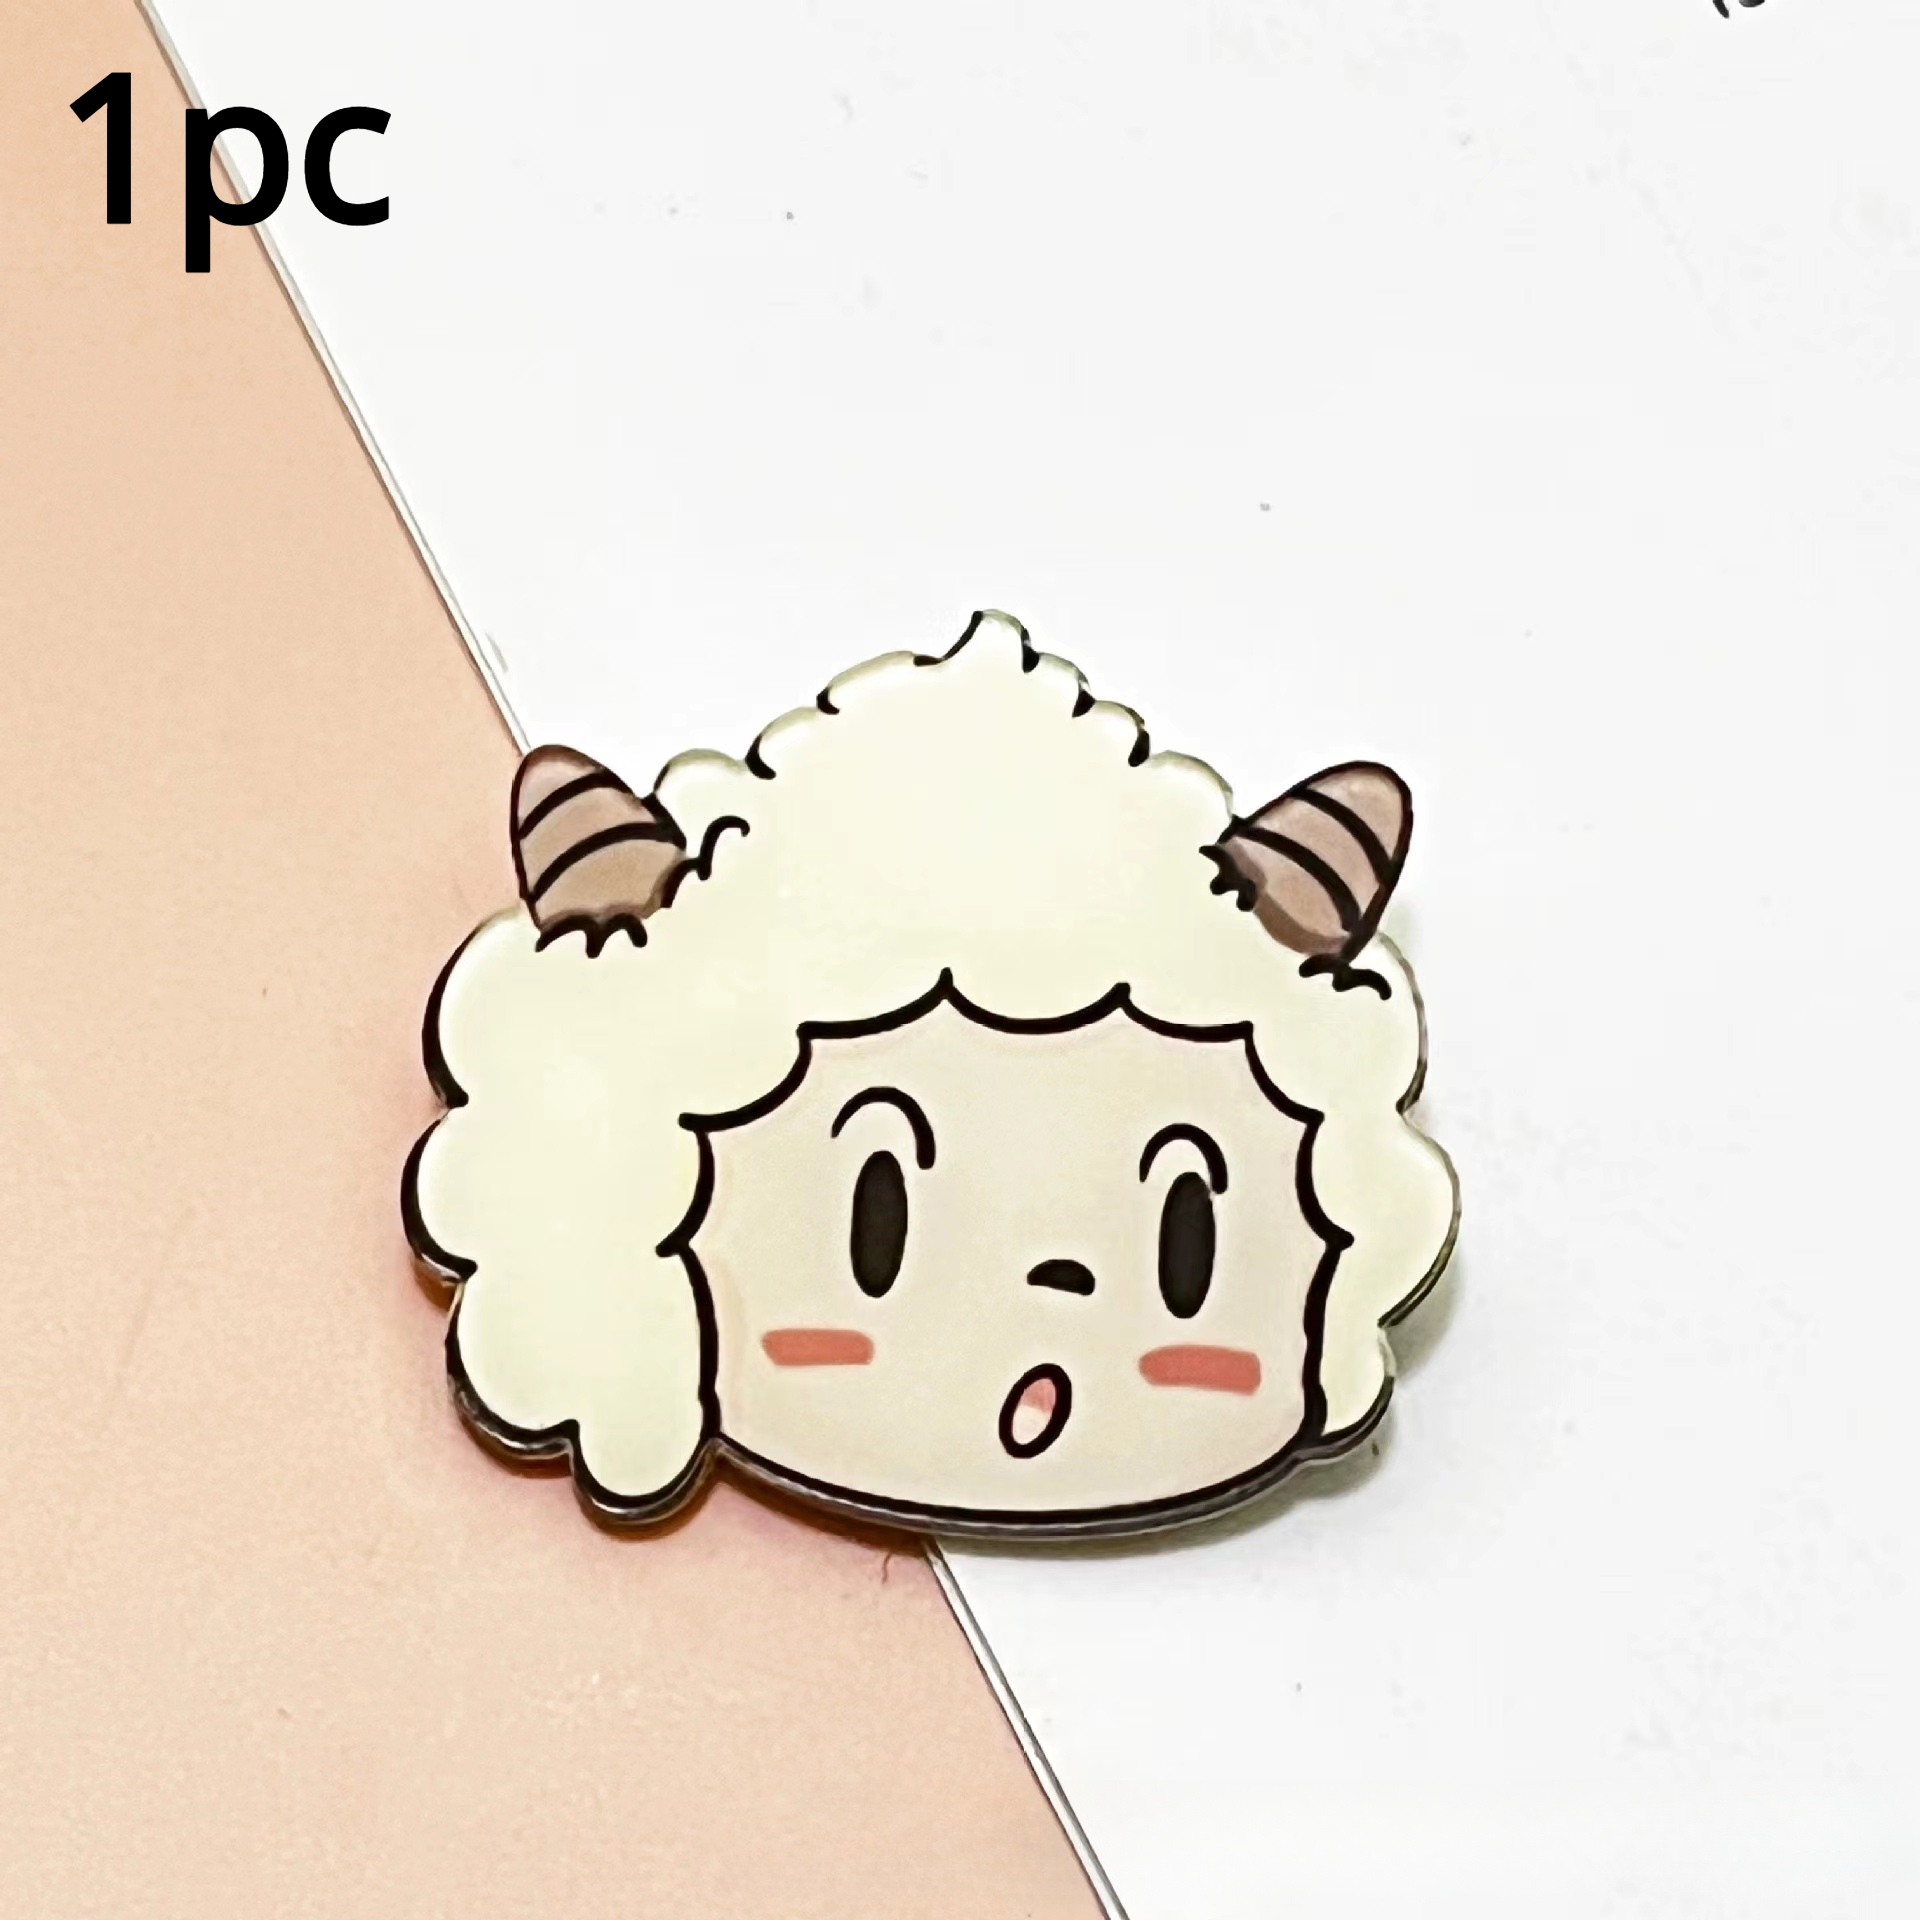 ZUARFY Cartoon Cute Pin Badge Lovely Acrylic Brooch Jewelry Accessories for  Clothes Cap Bag Decoration 